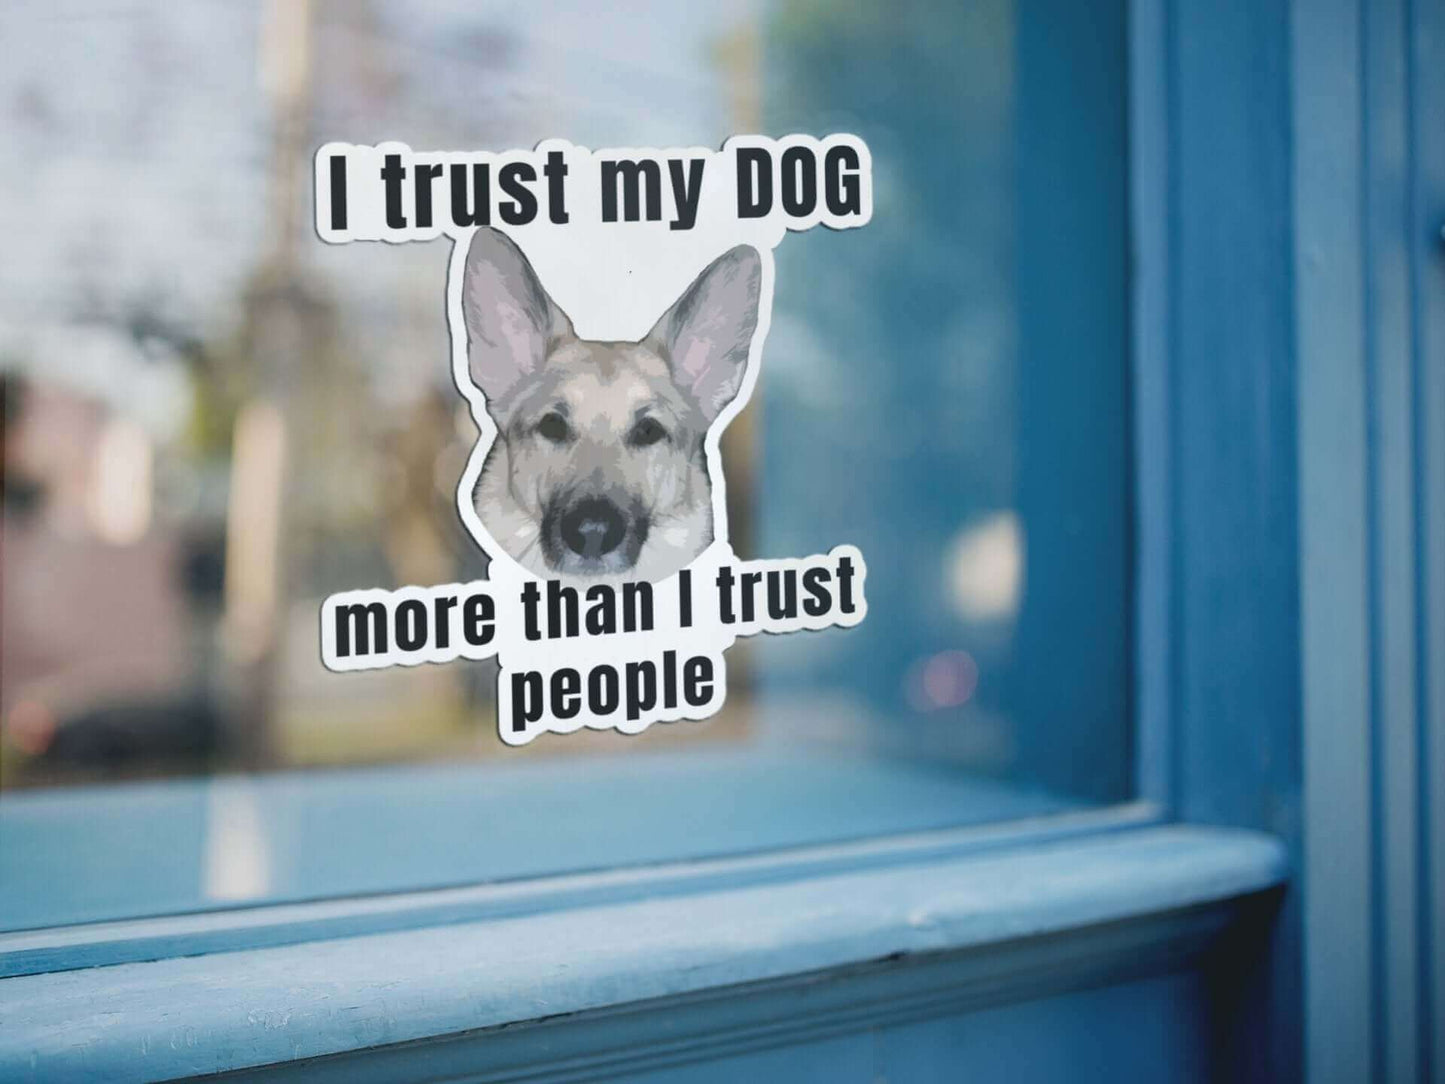 I trust my dog more than I trust people - Bubble-free stickers canine Dog Dog Lover Dog Owner Dog Sticker funny sticker G.S.D German Shepherd GSD K9 meme sticker Police Dog puppy Shepherd sticker Vinyl Dog Sticker Vinyl Sticker water proof sticker